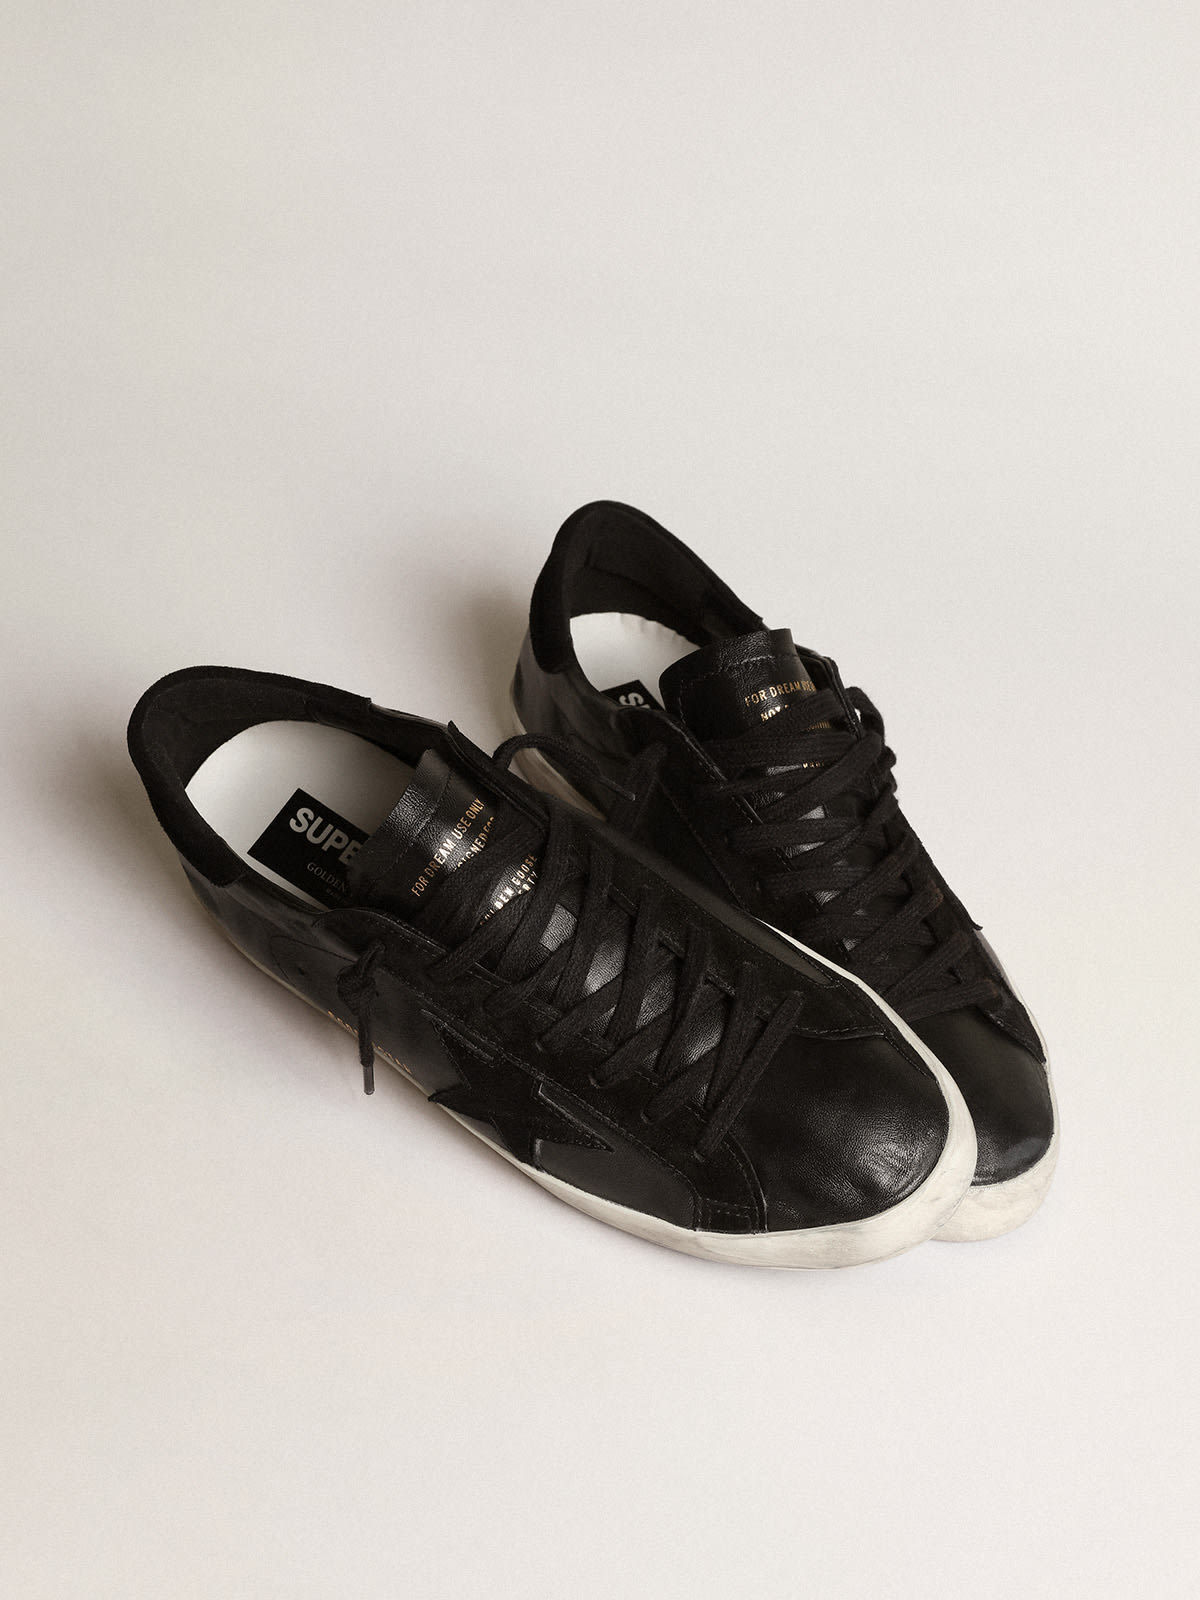 Golden Goose - Super-Star in black nappa with black suede star and heel tab in 